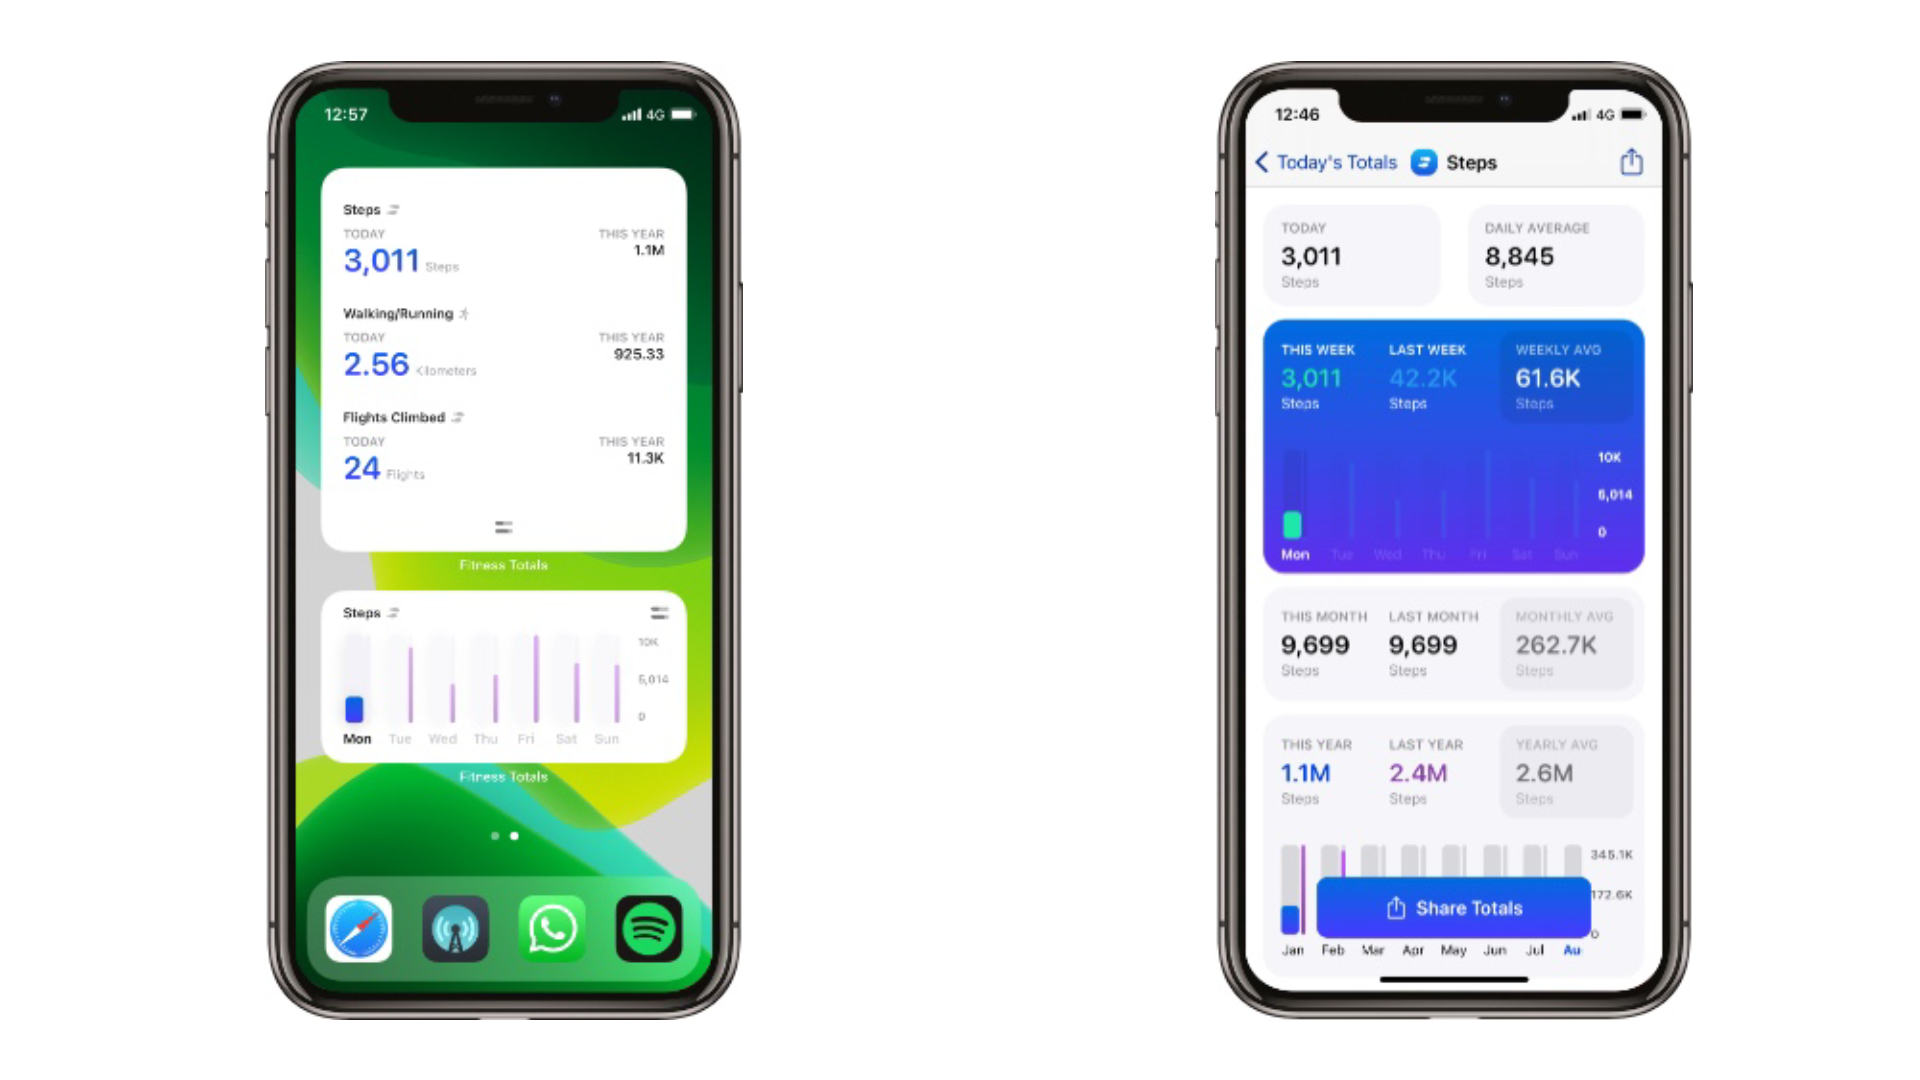 New widgets in Fitness Totals 1.1 on an iPhone X